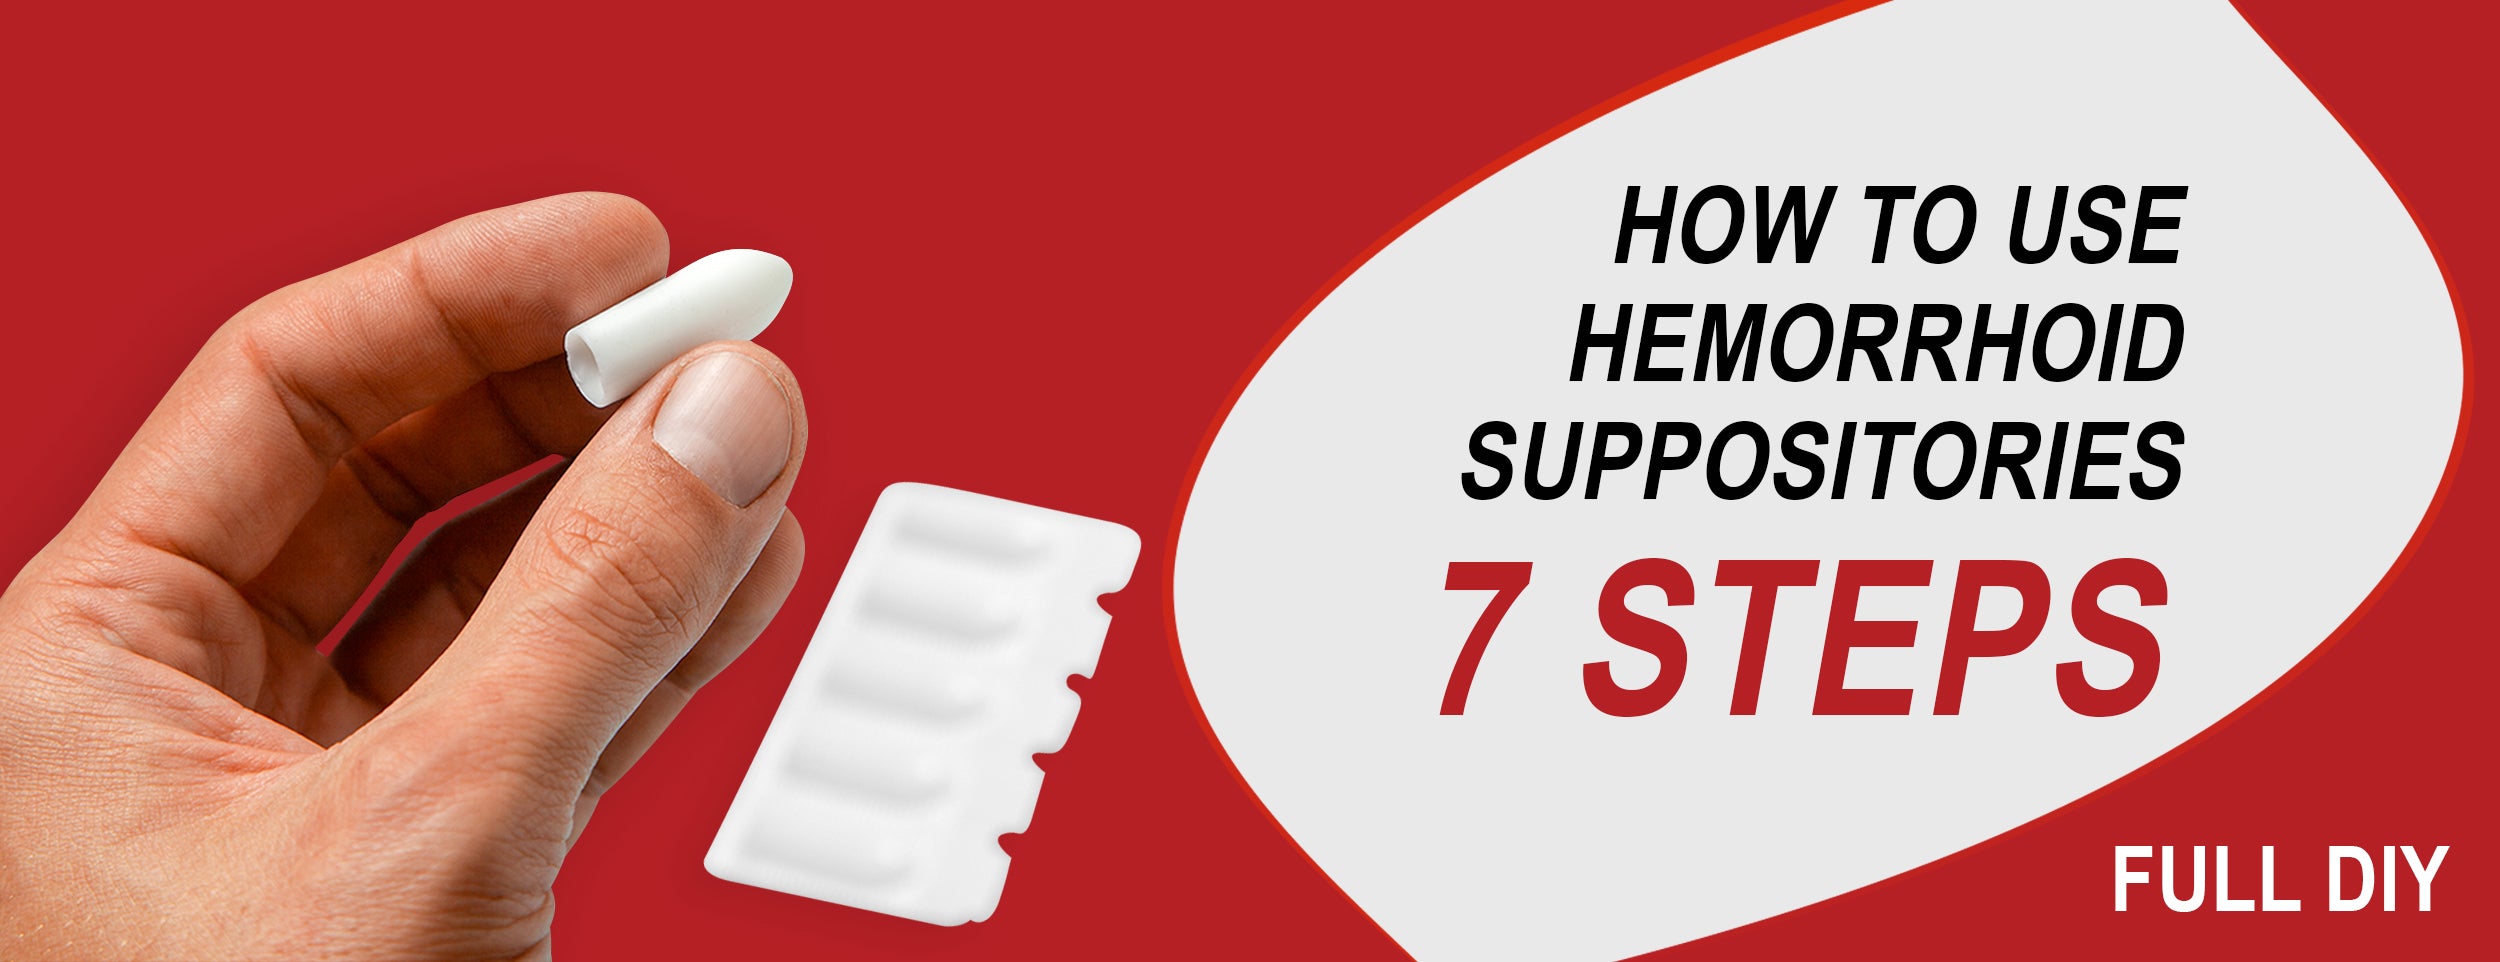 Follow these 7 steps to use hemorrhoid suppositories